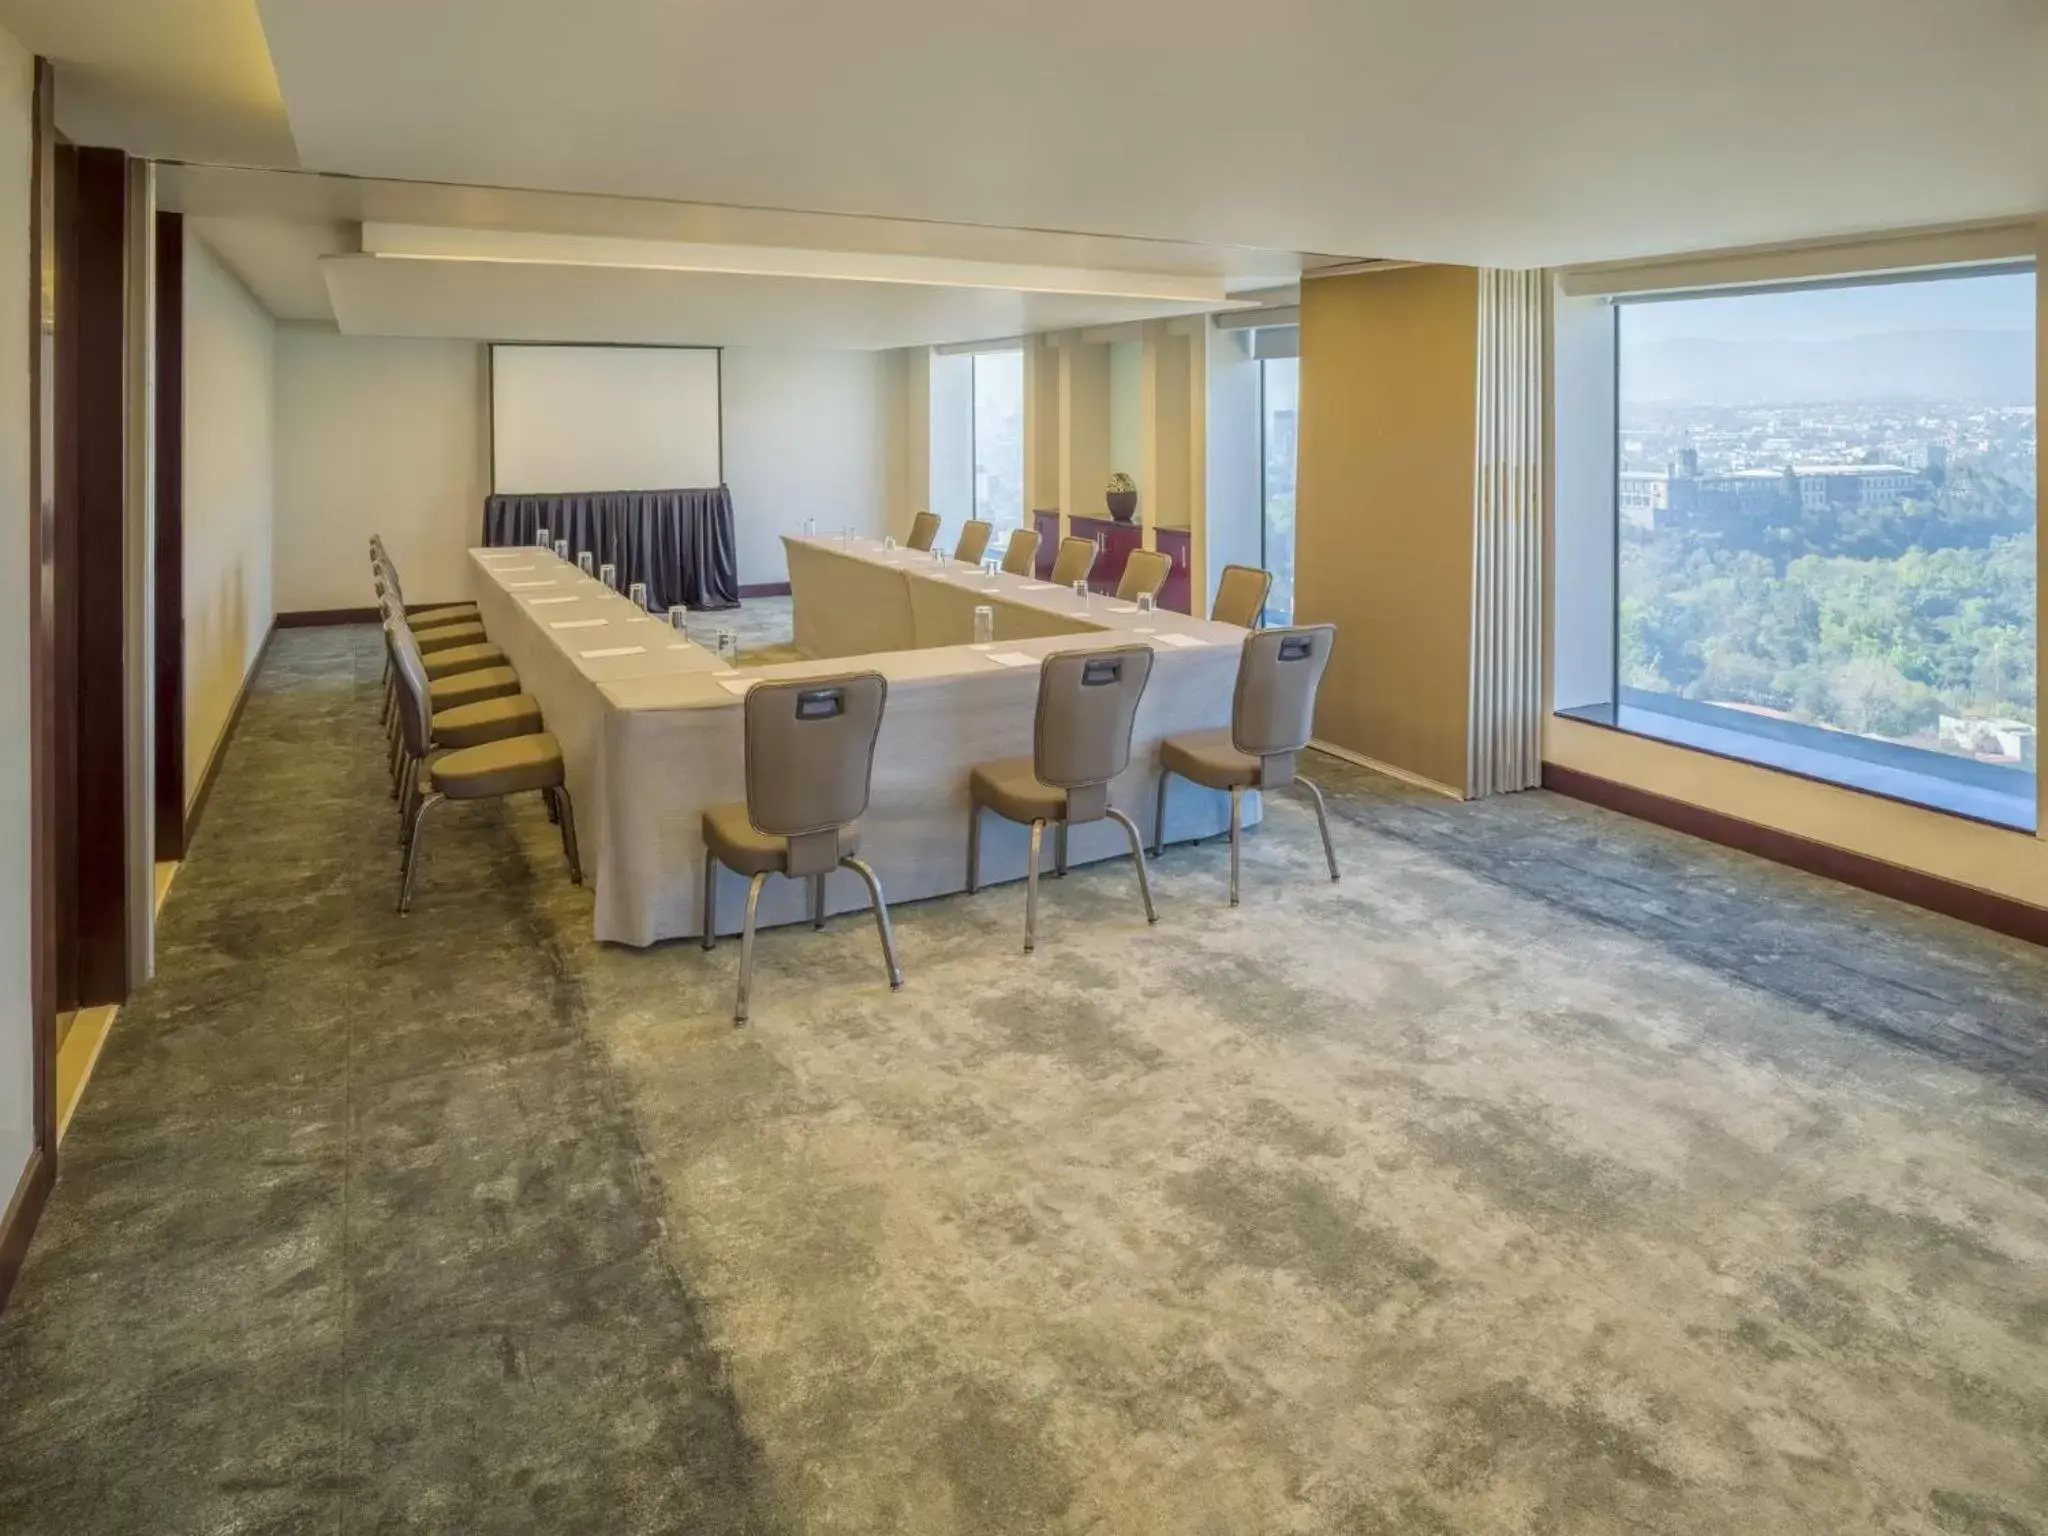 Meeting/conference room in Grand Fiesta Americana Chapultepec